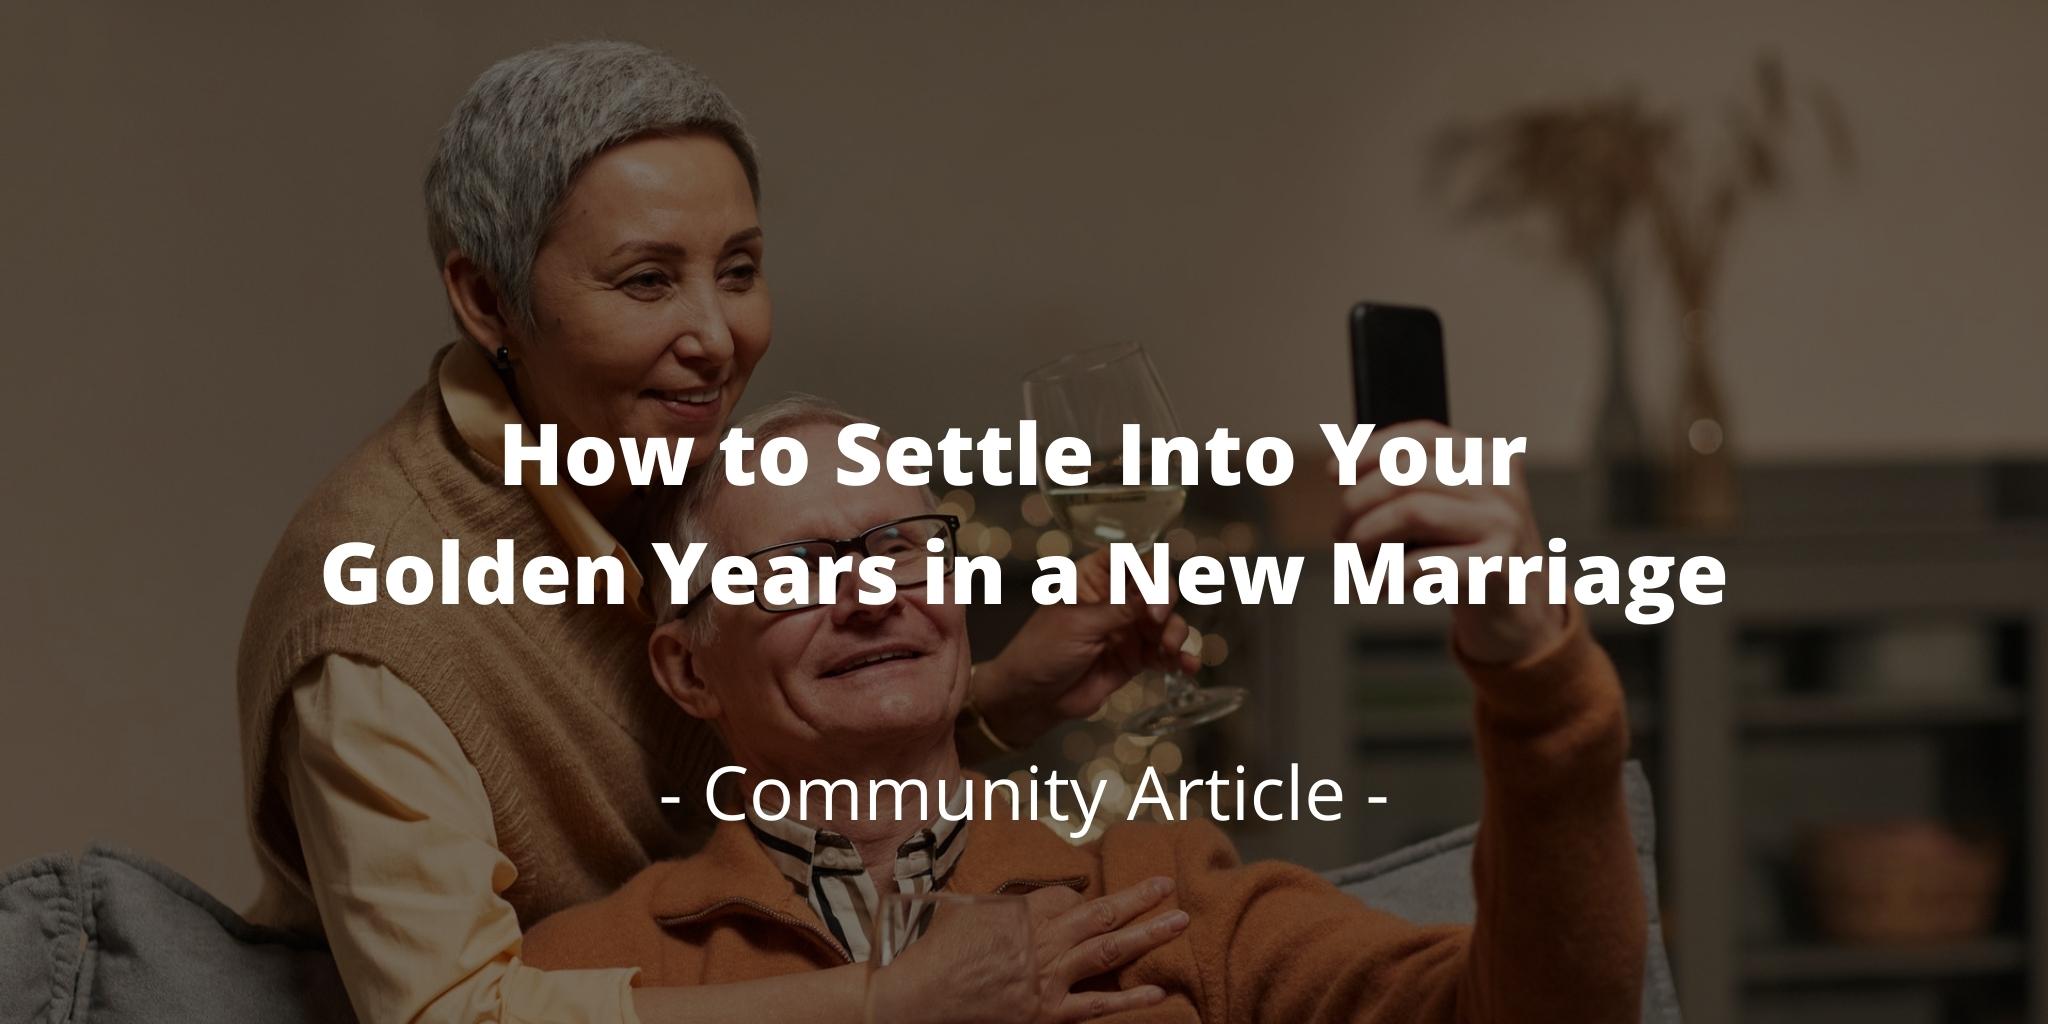 How to Settle Into Your Golden Years in a New Marriage